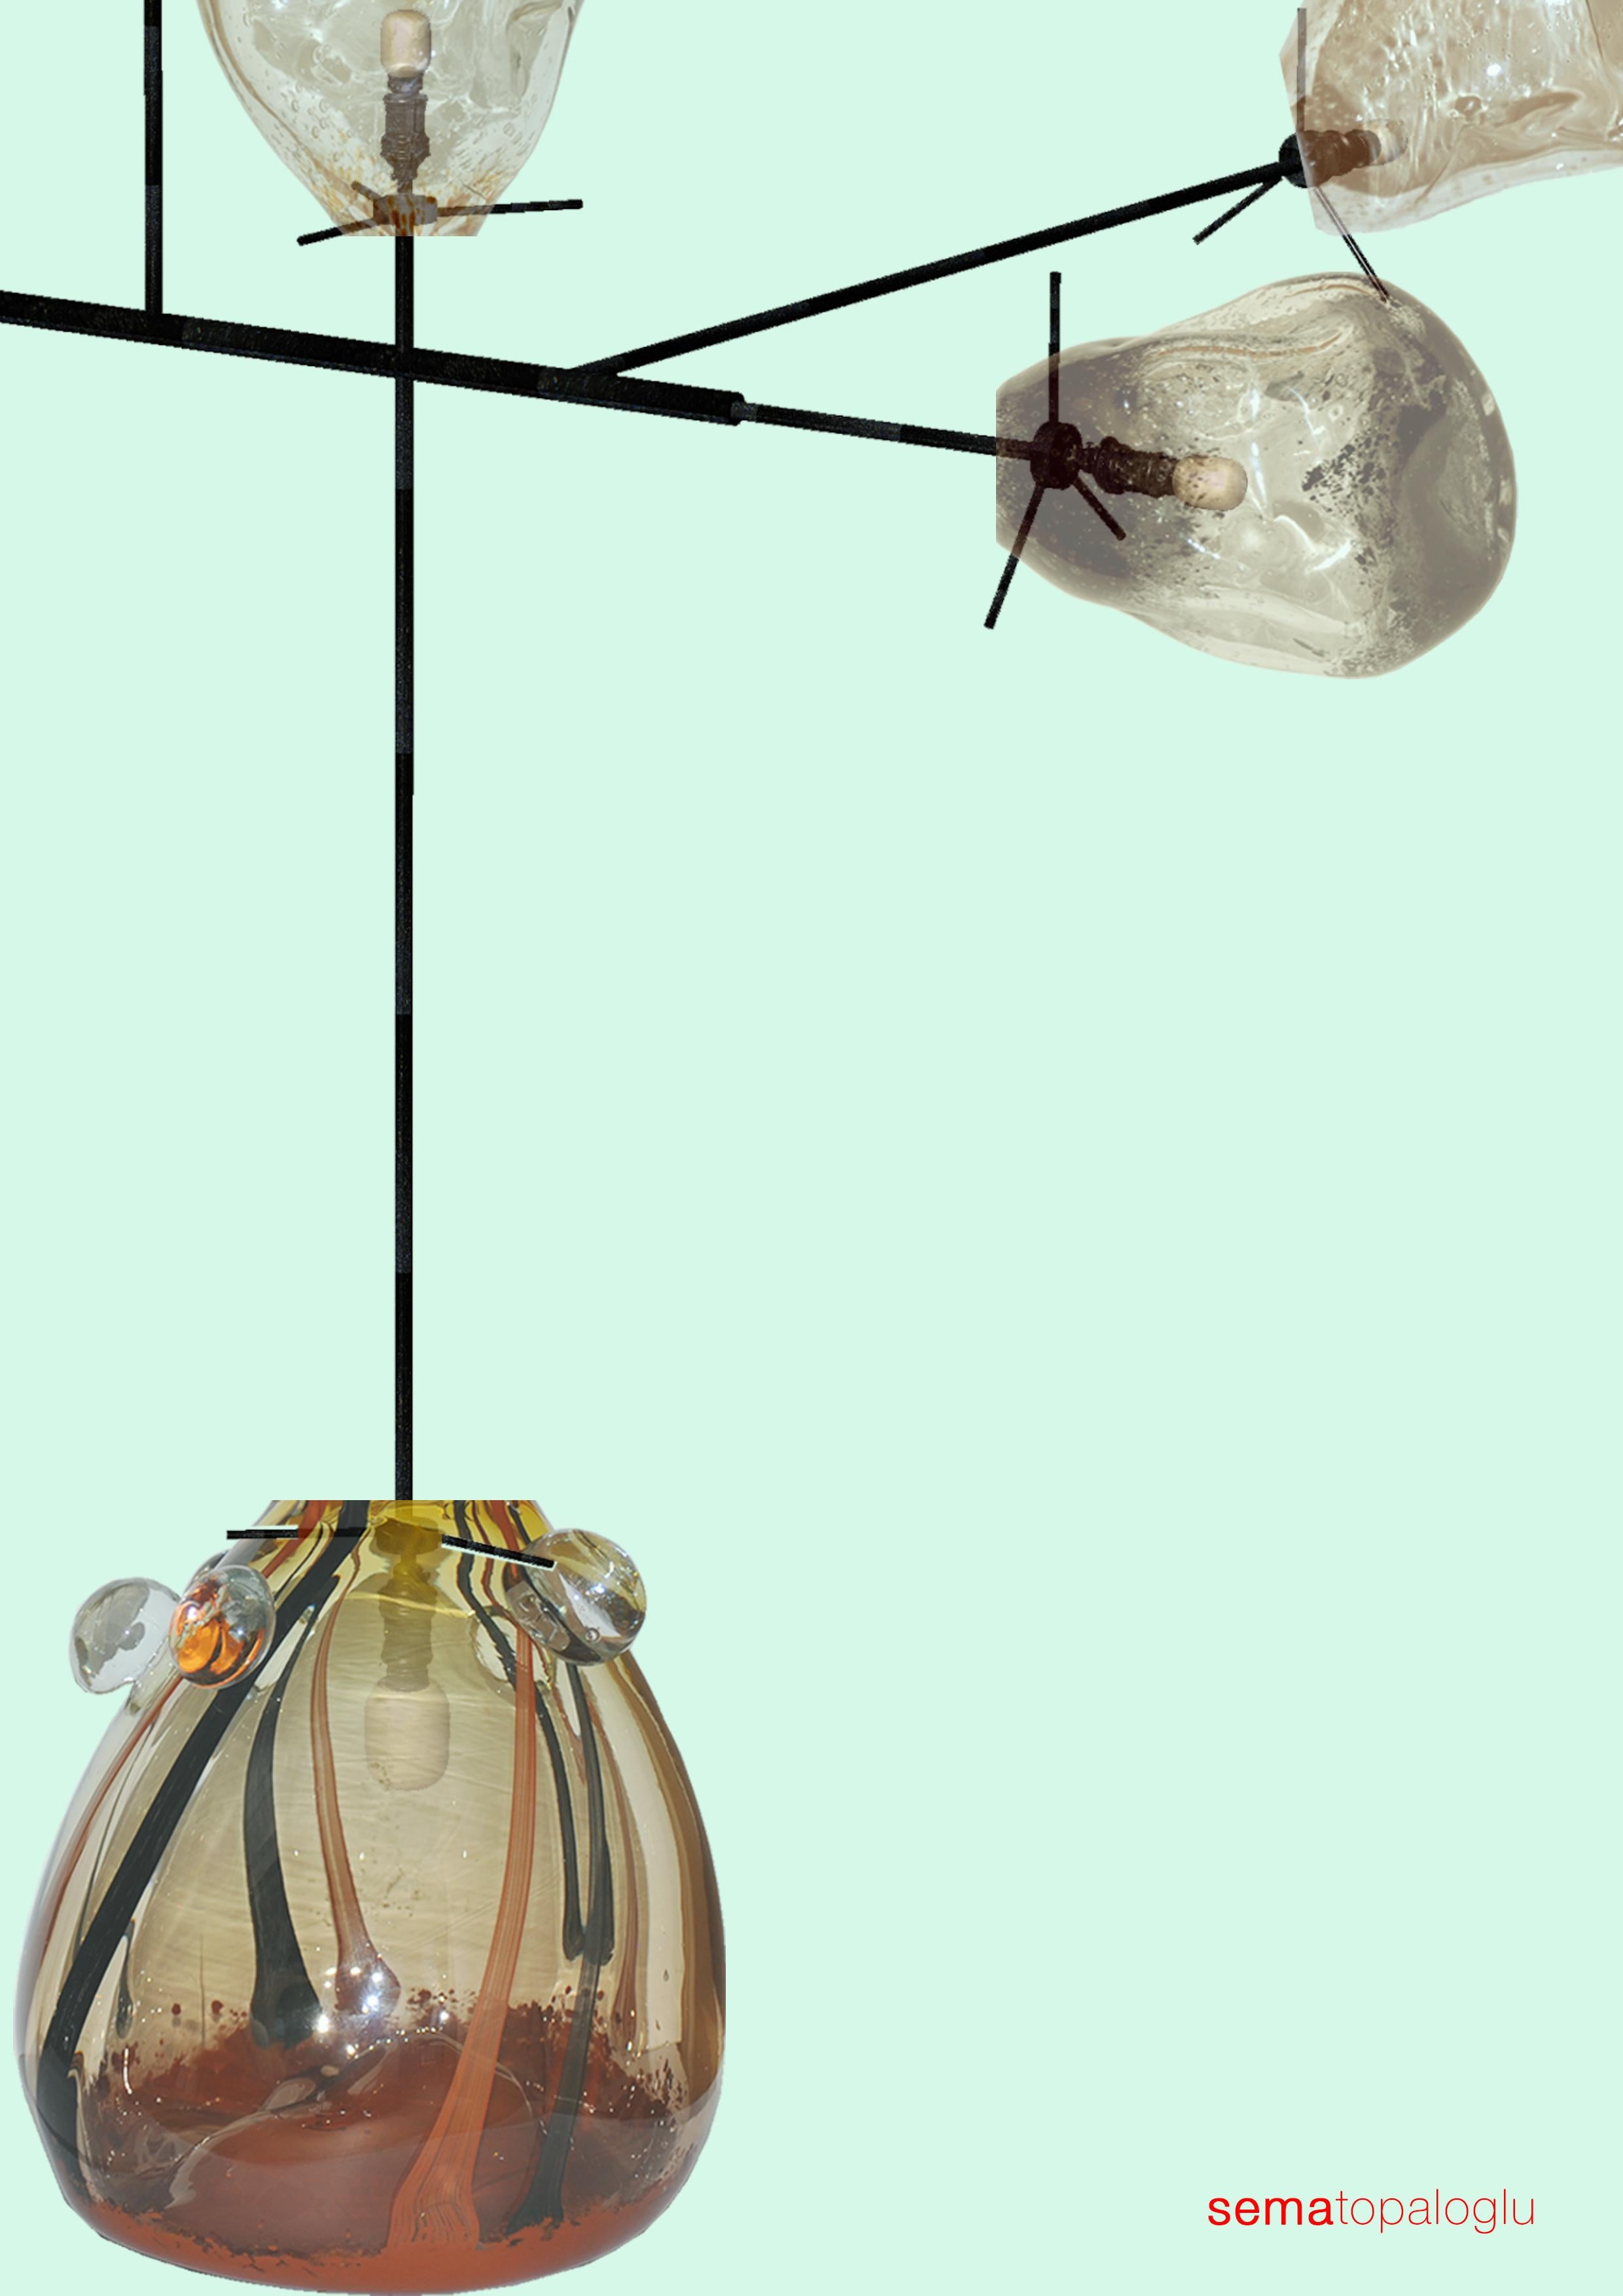 Welded free lamp collection - pendant lamp by Sema Topaloglu